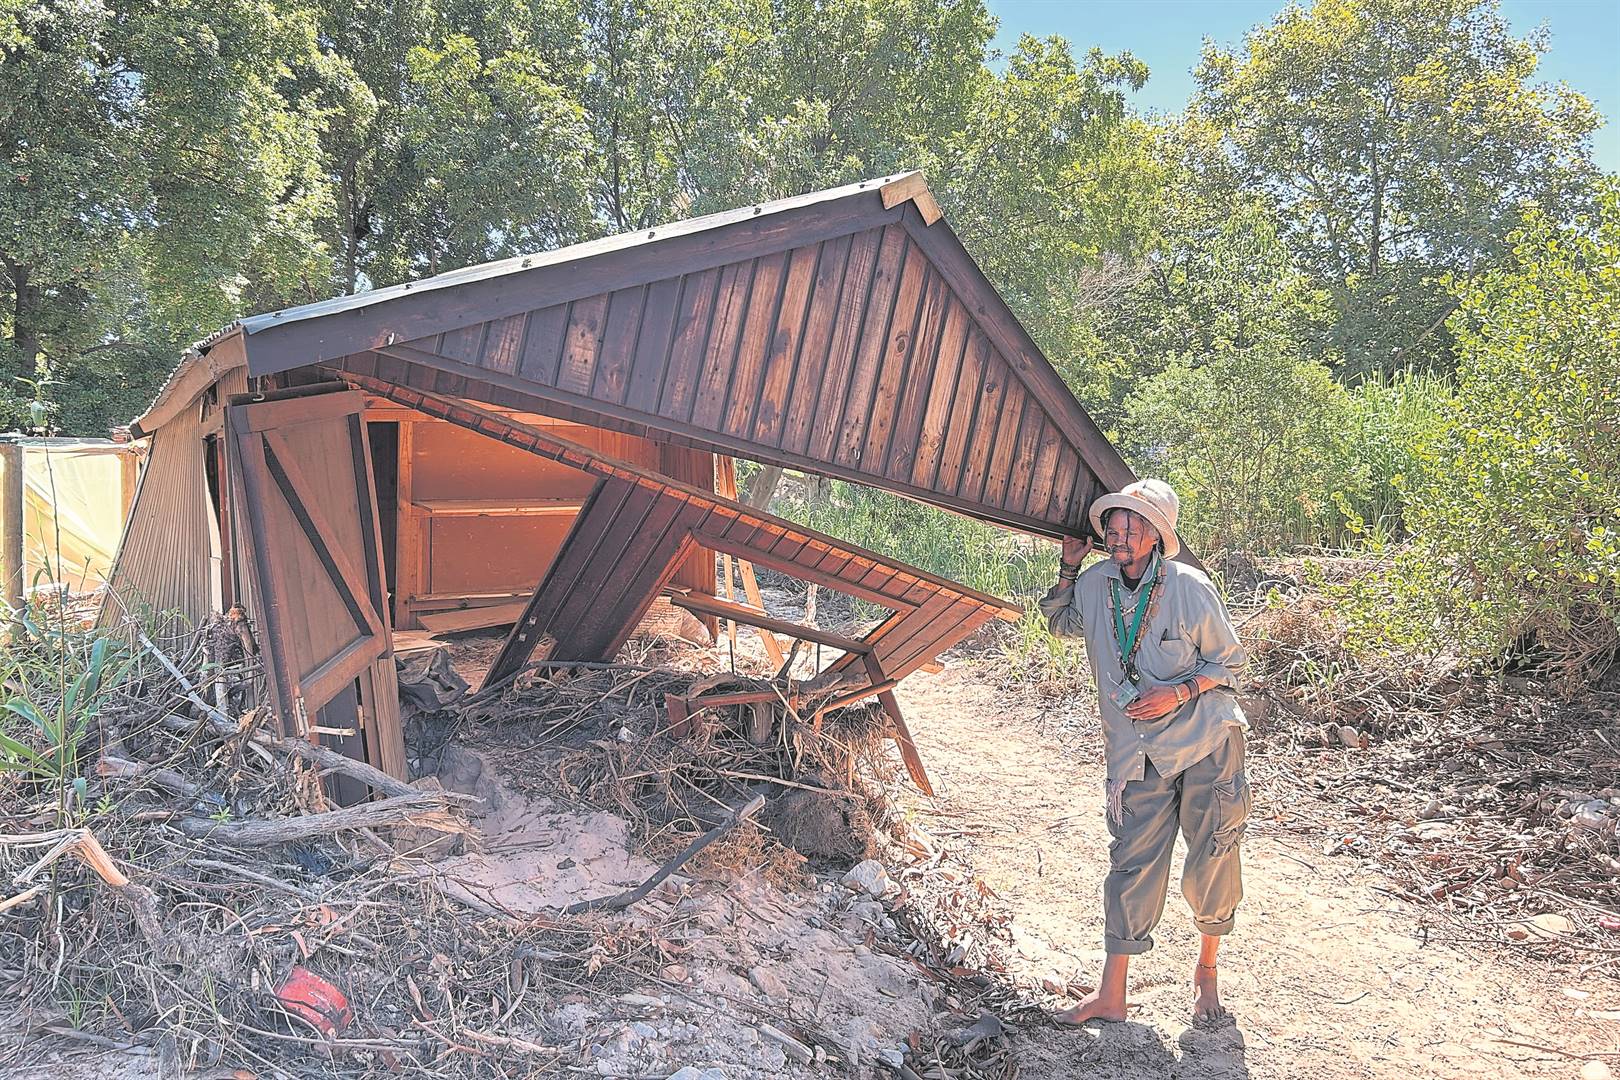 Judah James (51) next to his ruined wendy house in the middle of the botanical garden, which was damaged in the September floods last year.Photos: Rasaad Adams